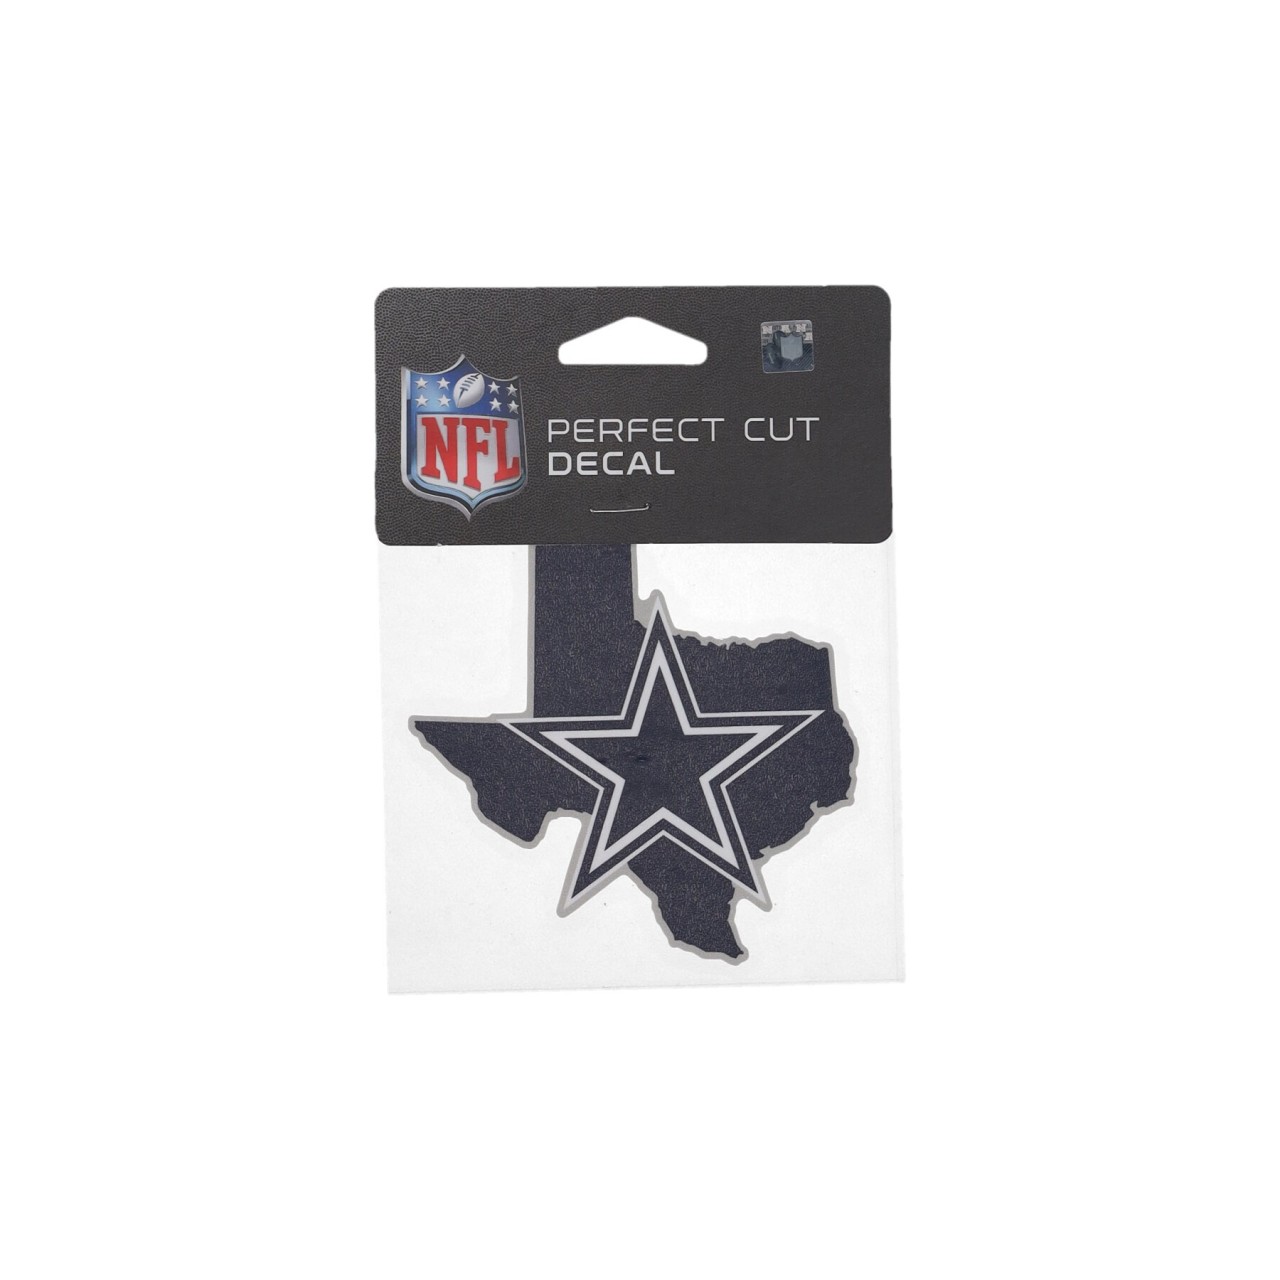 WINCRAFT NFL 4 x 4” PERFECT CUT DECAL DALCOW 04323419